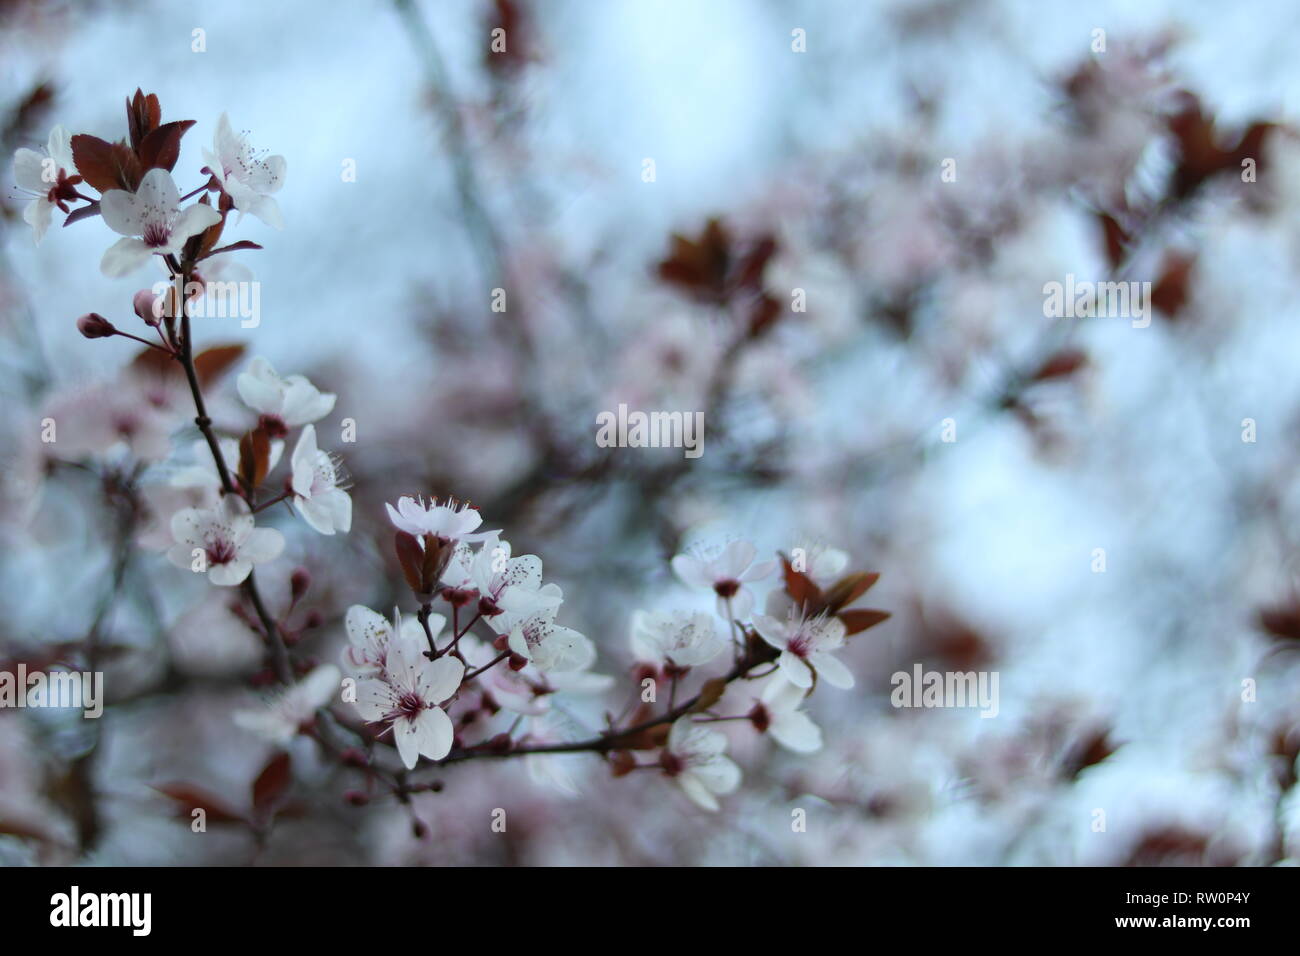 Spring is coming and trees (cherry) are blooming with all the power of nature. Stock Photo